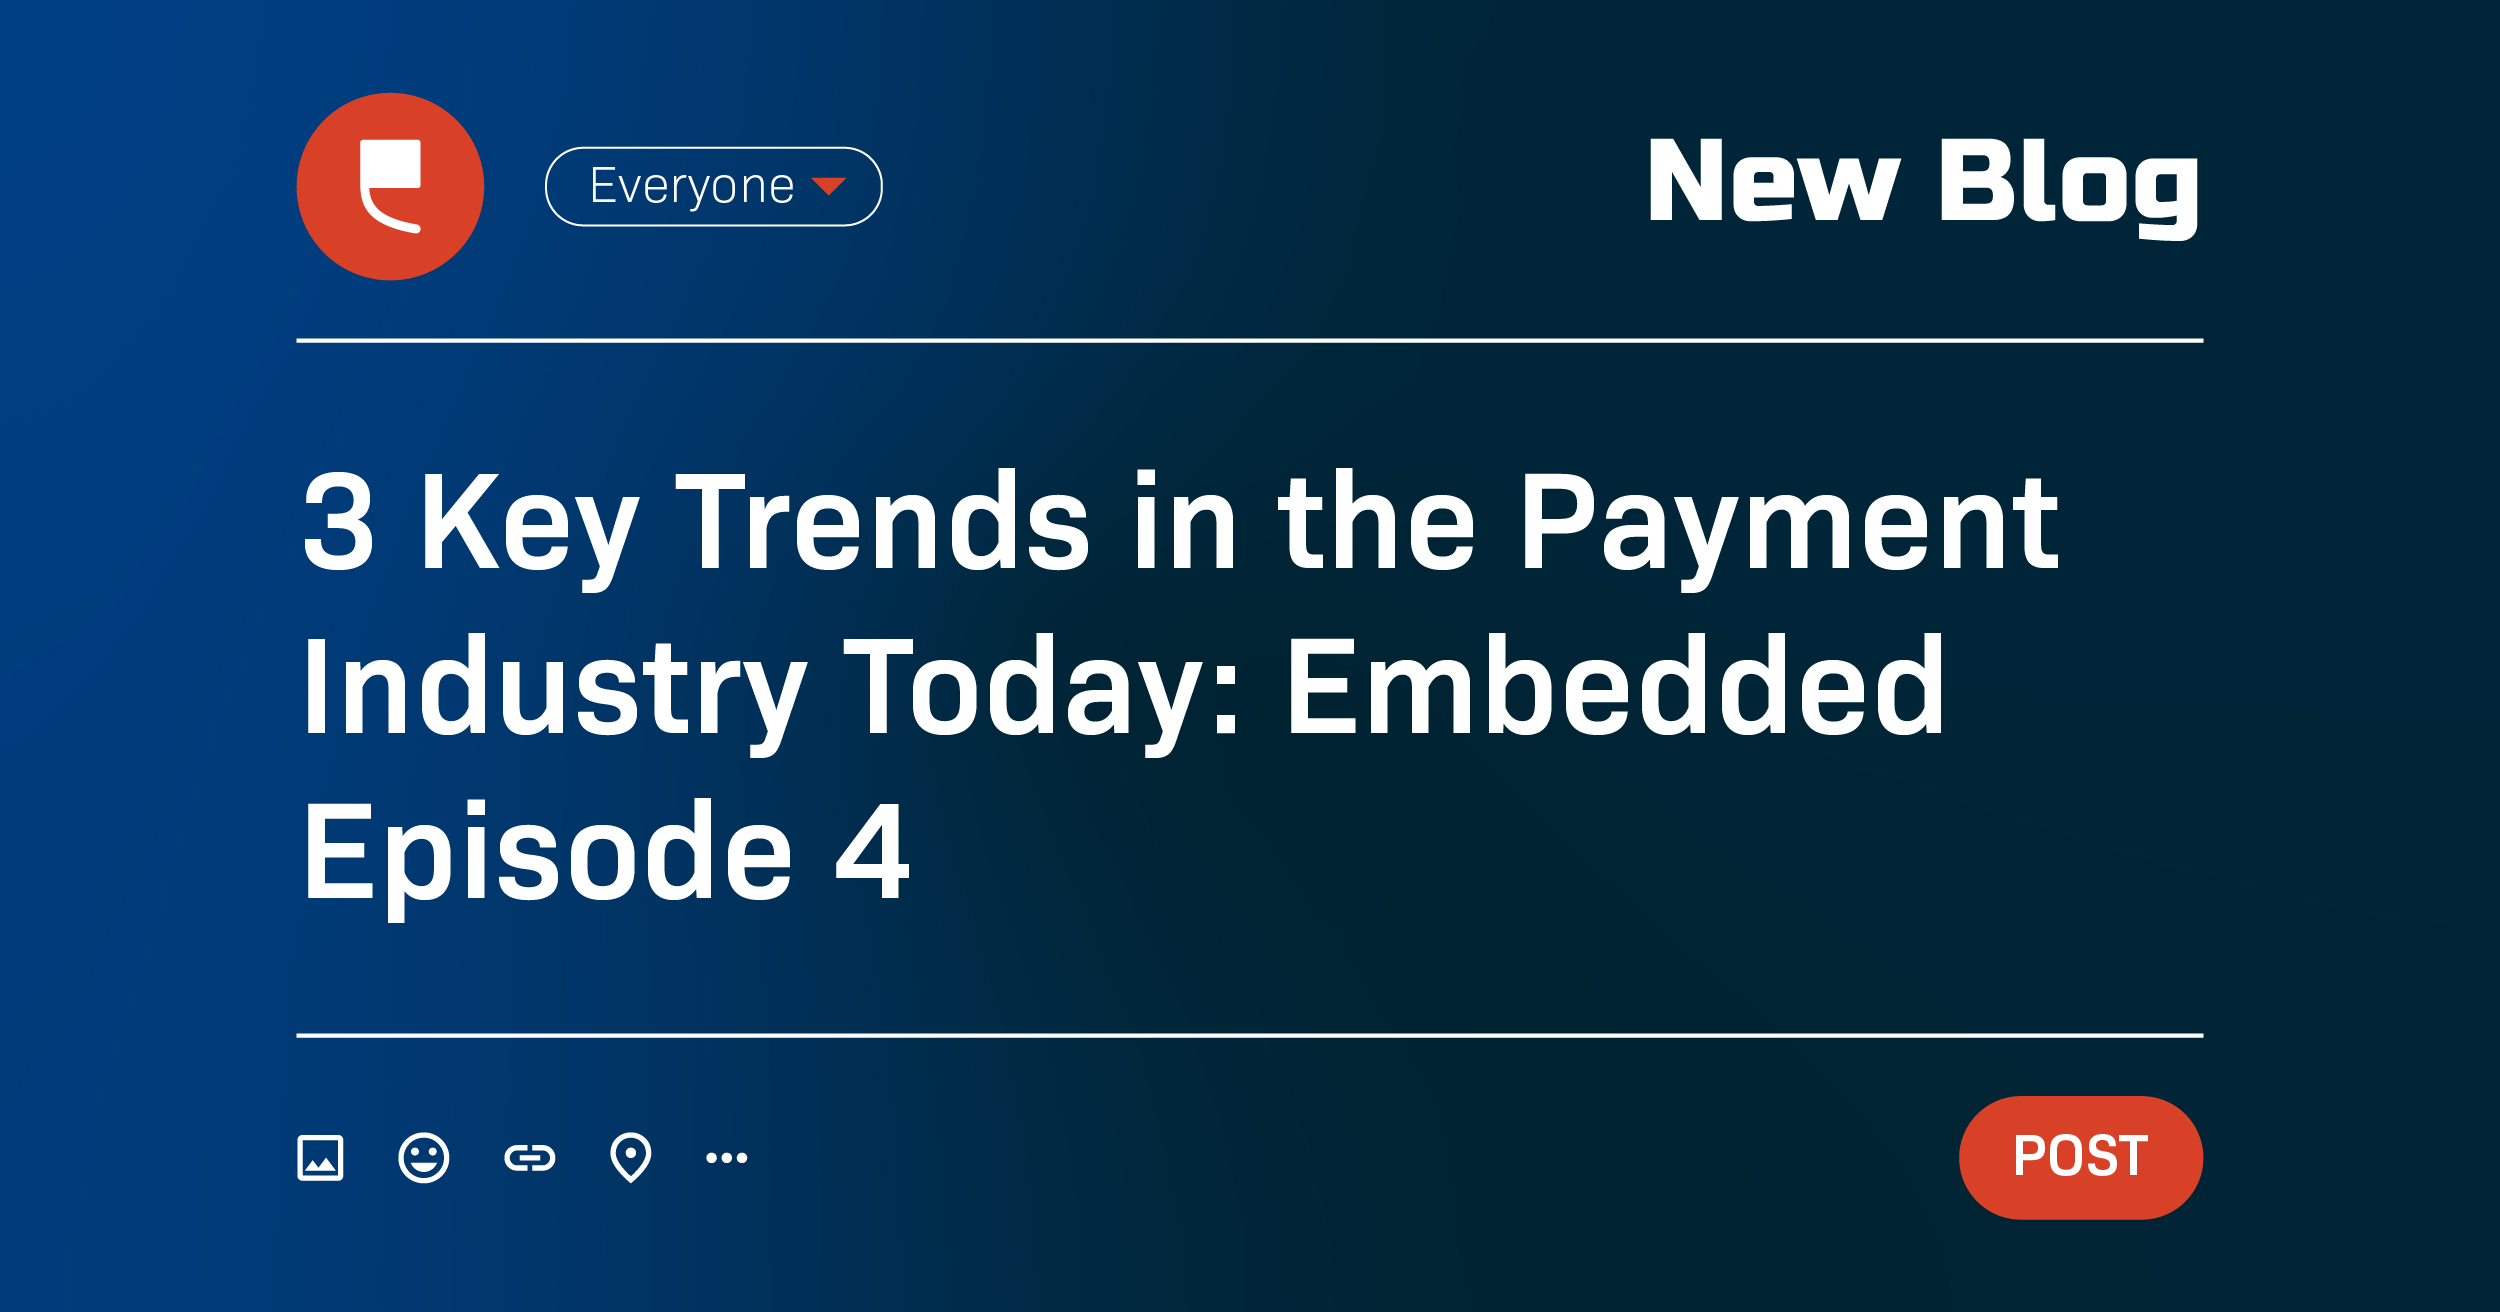 3 Key Trends in the Payment Industry Today: Embedded Episode 4  - Featured Image